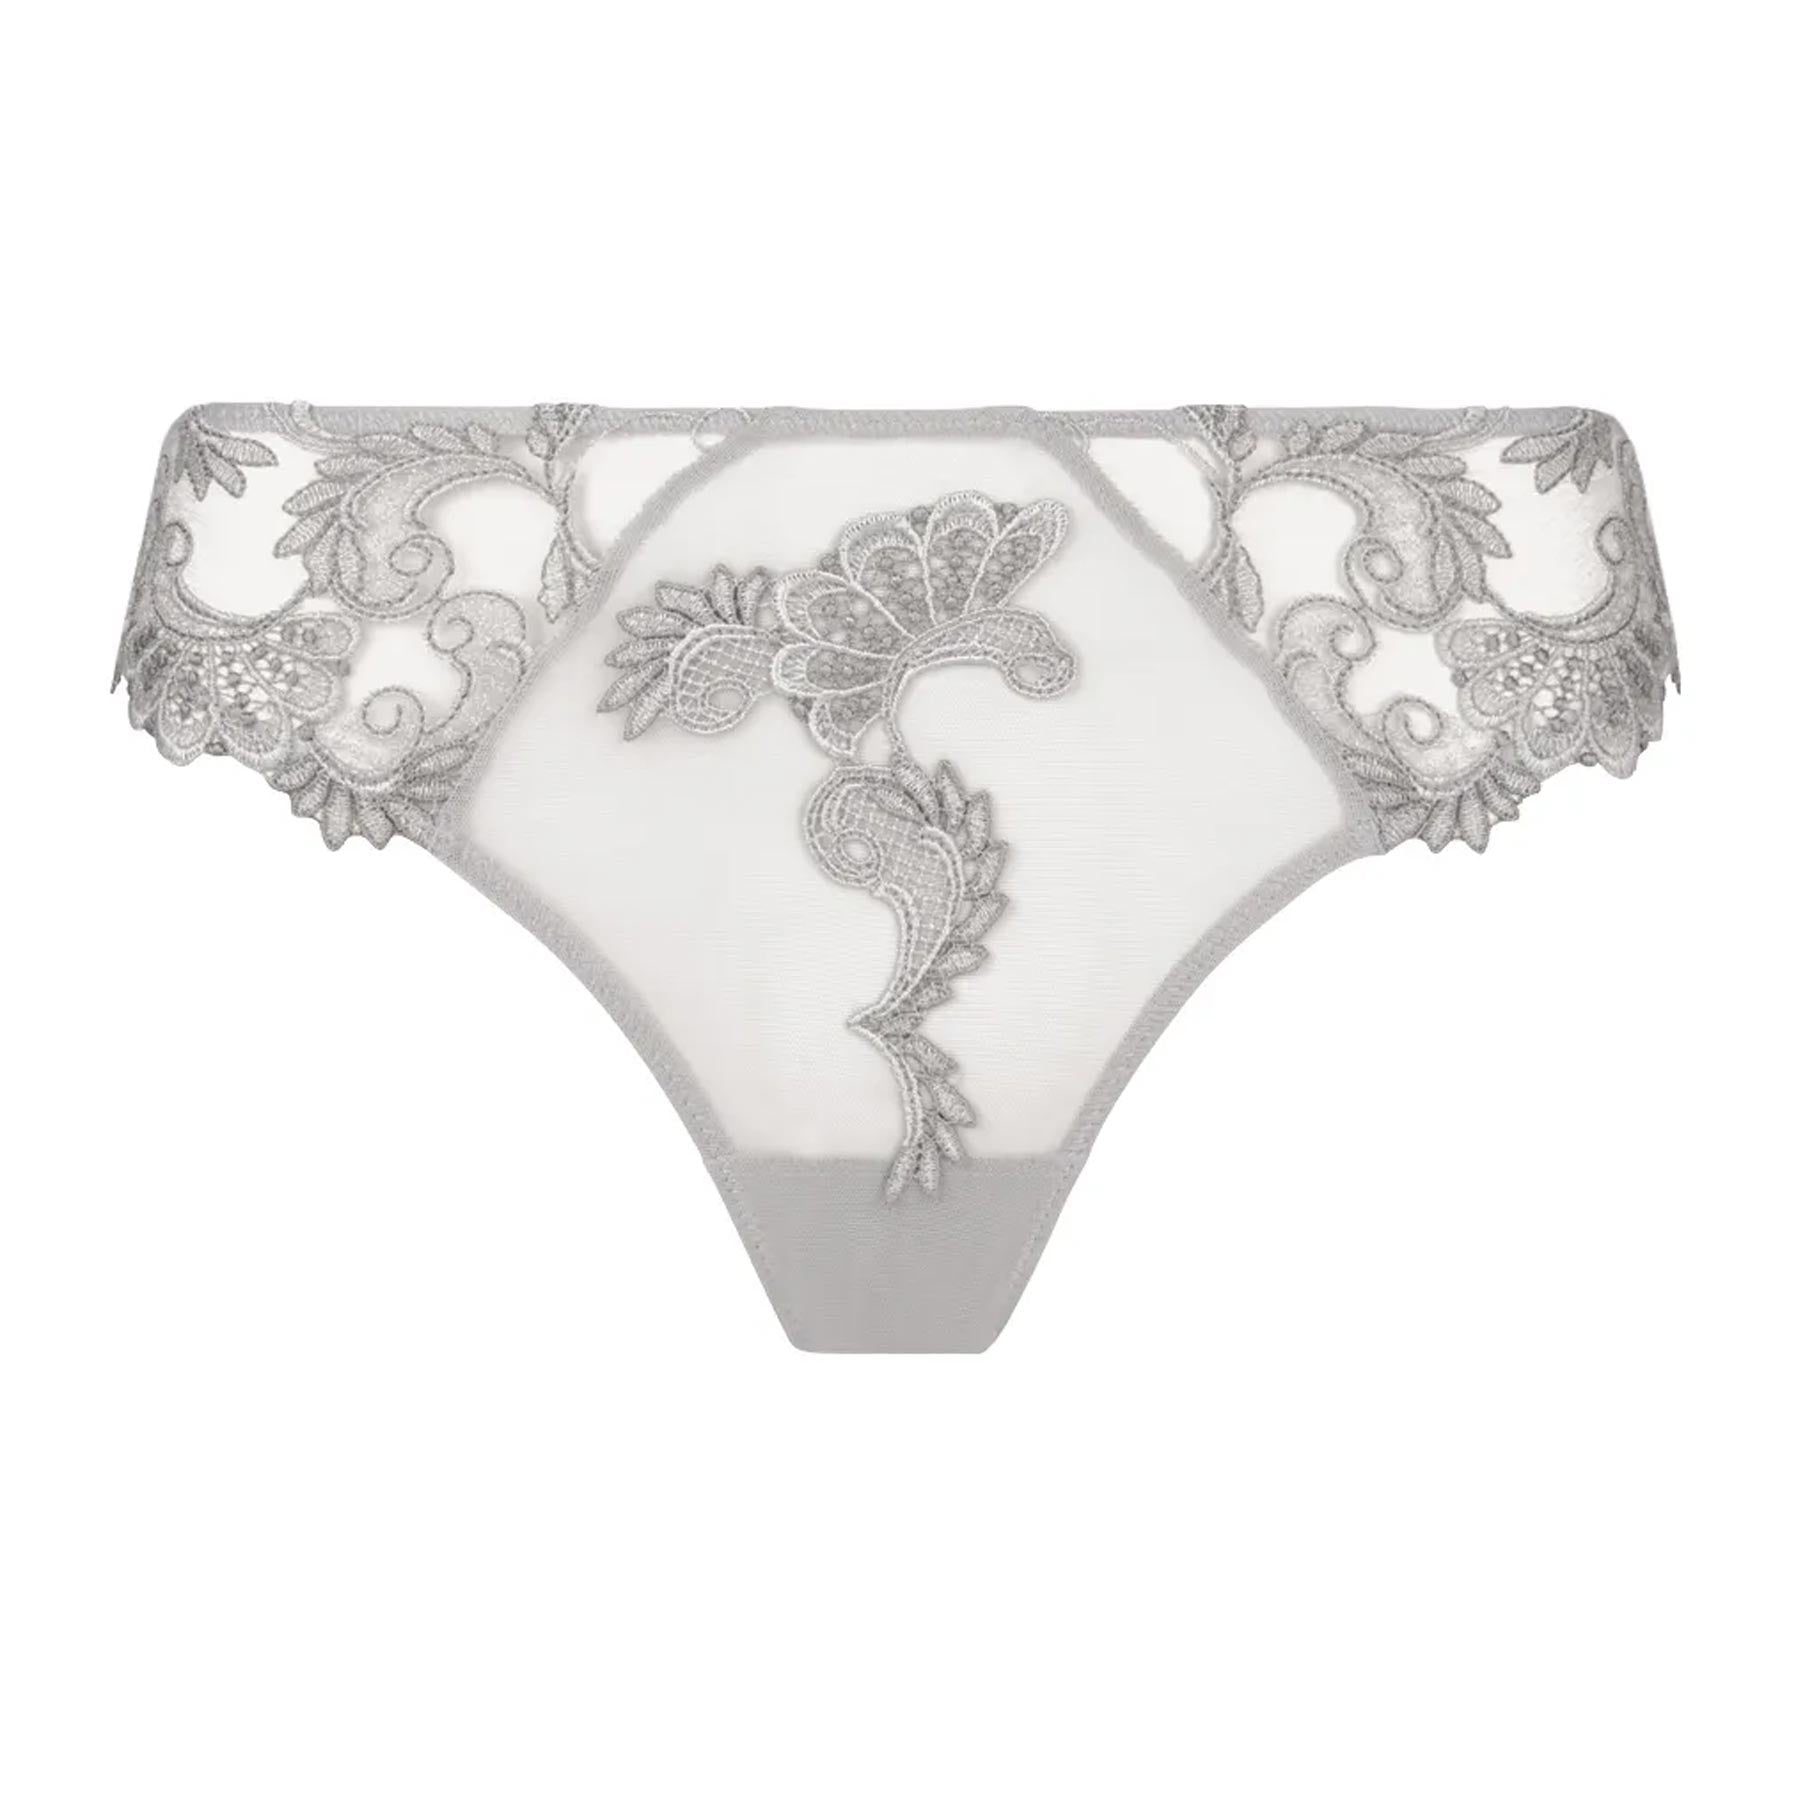 Lise Charmel Glamour Couture Italian Panty